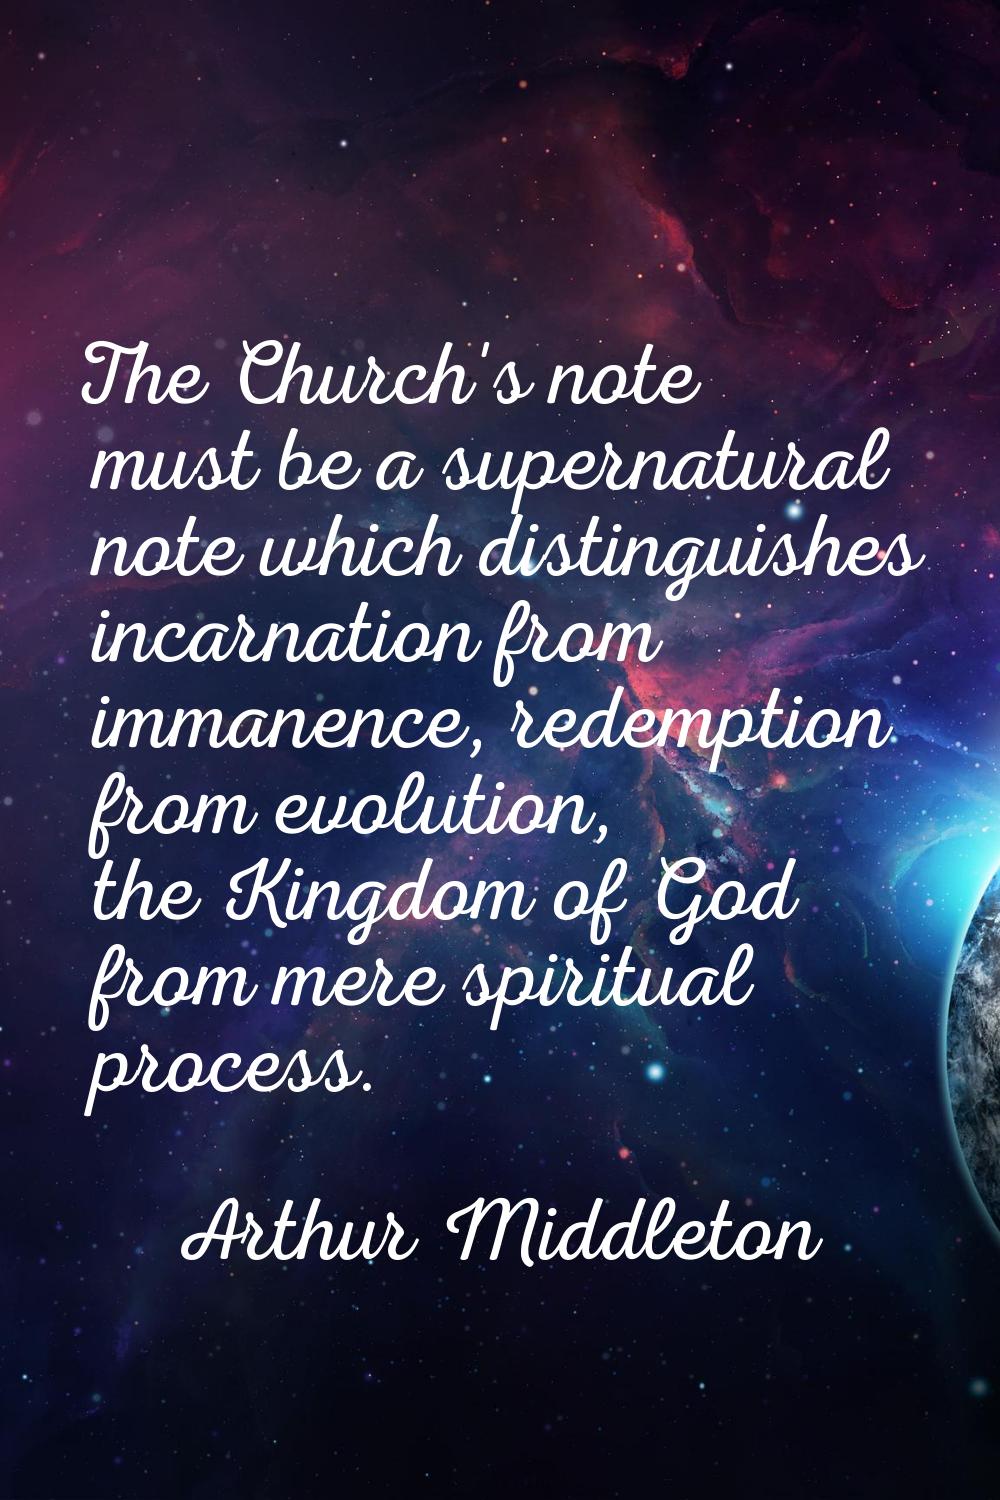 The Church's note must be a supernatural note which distinguishes incarnation from immanence, redem